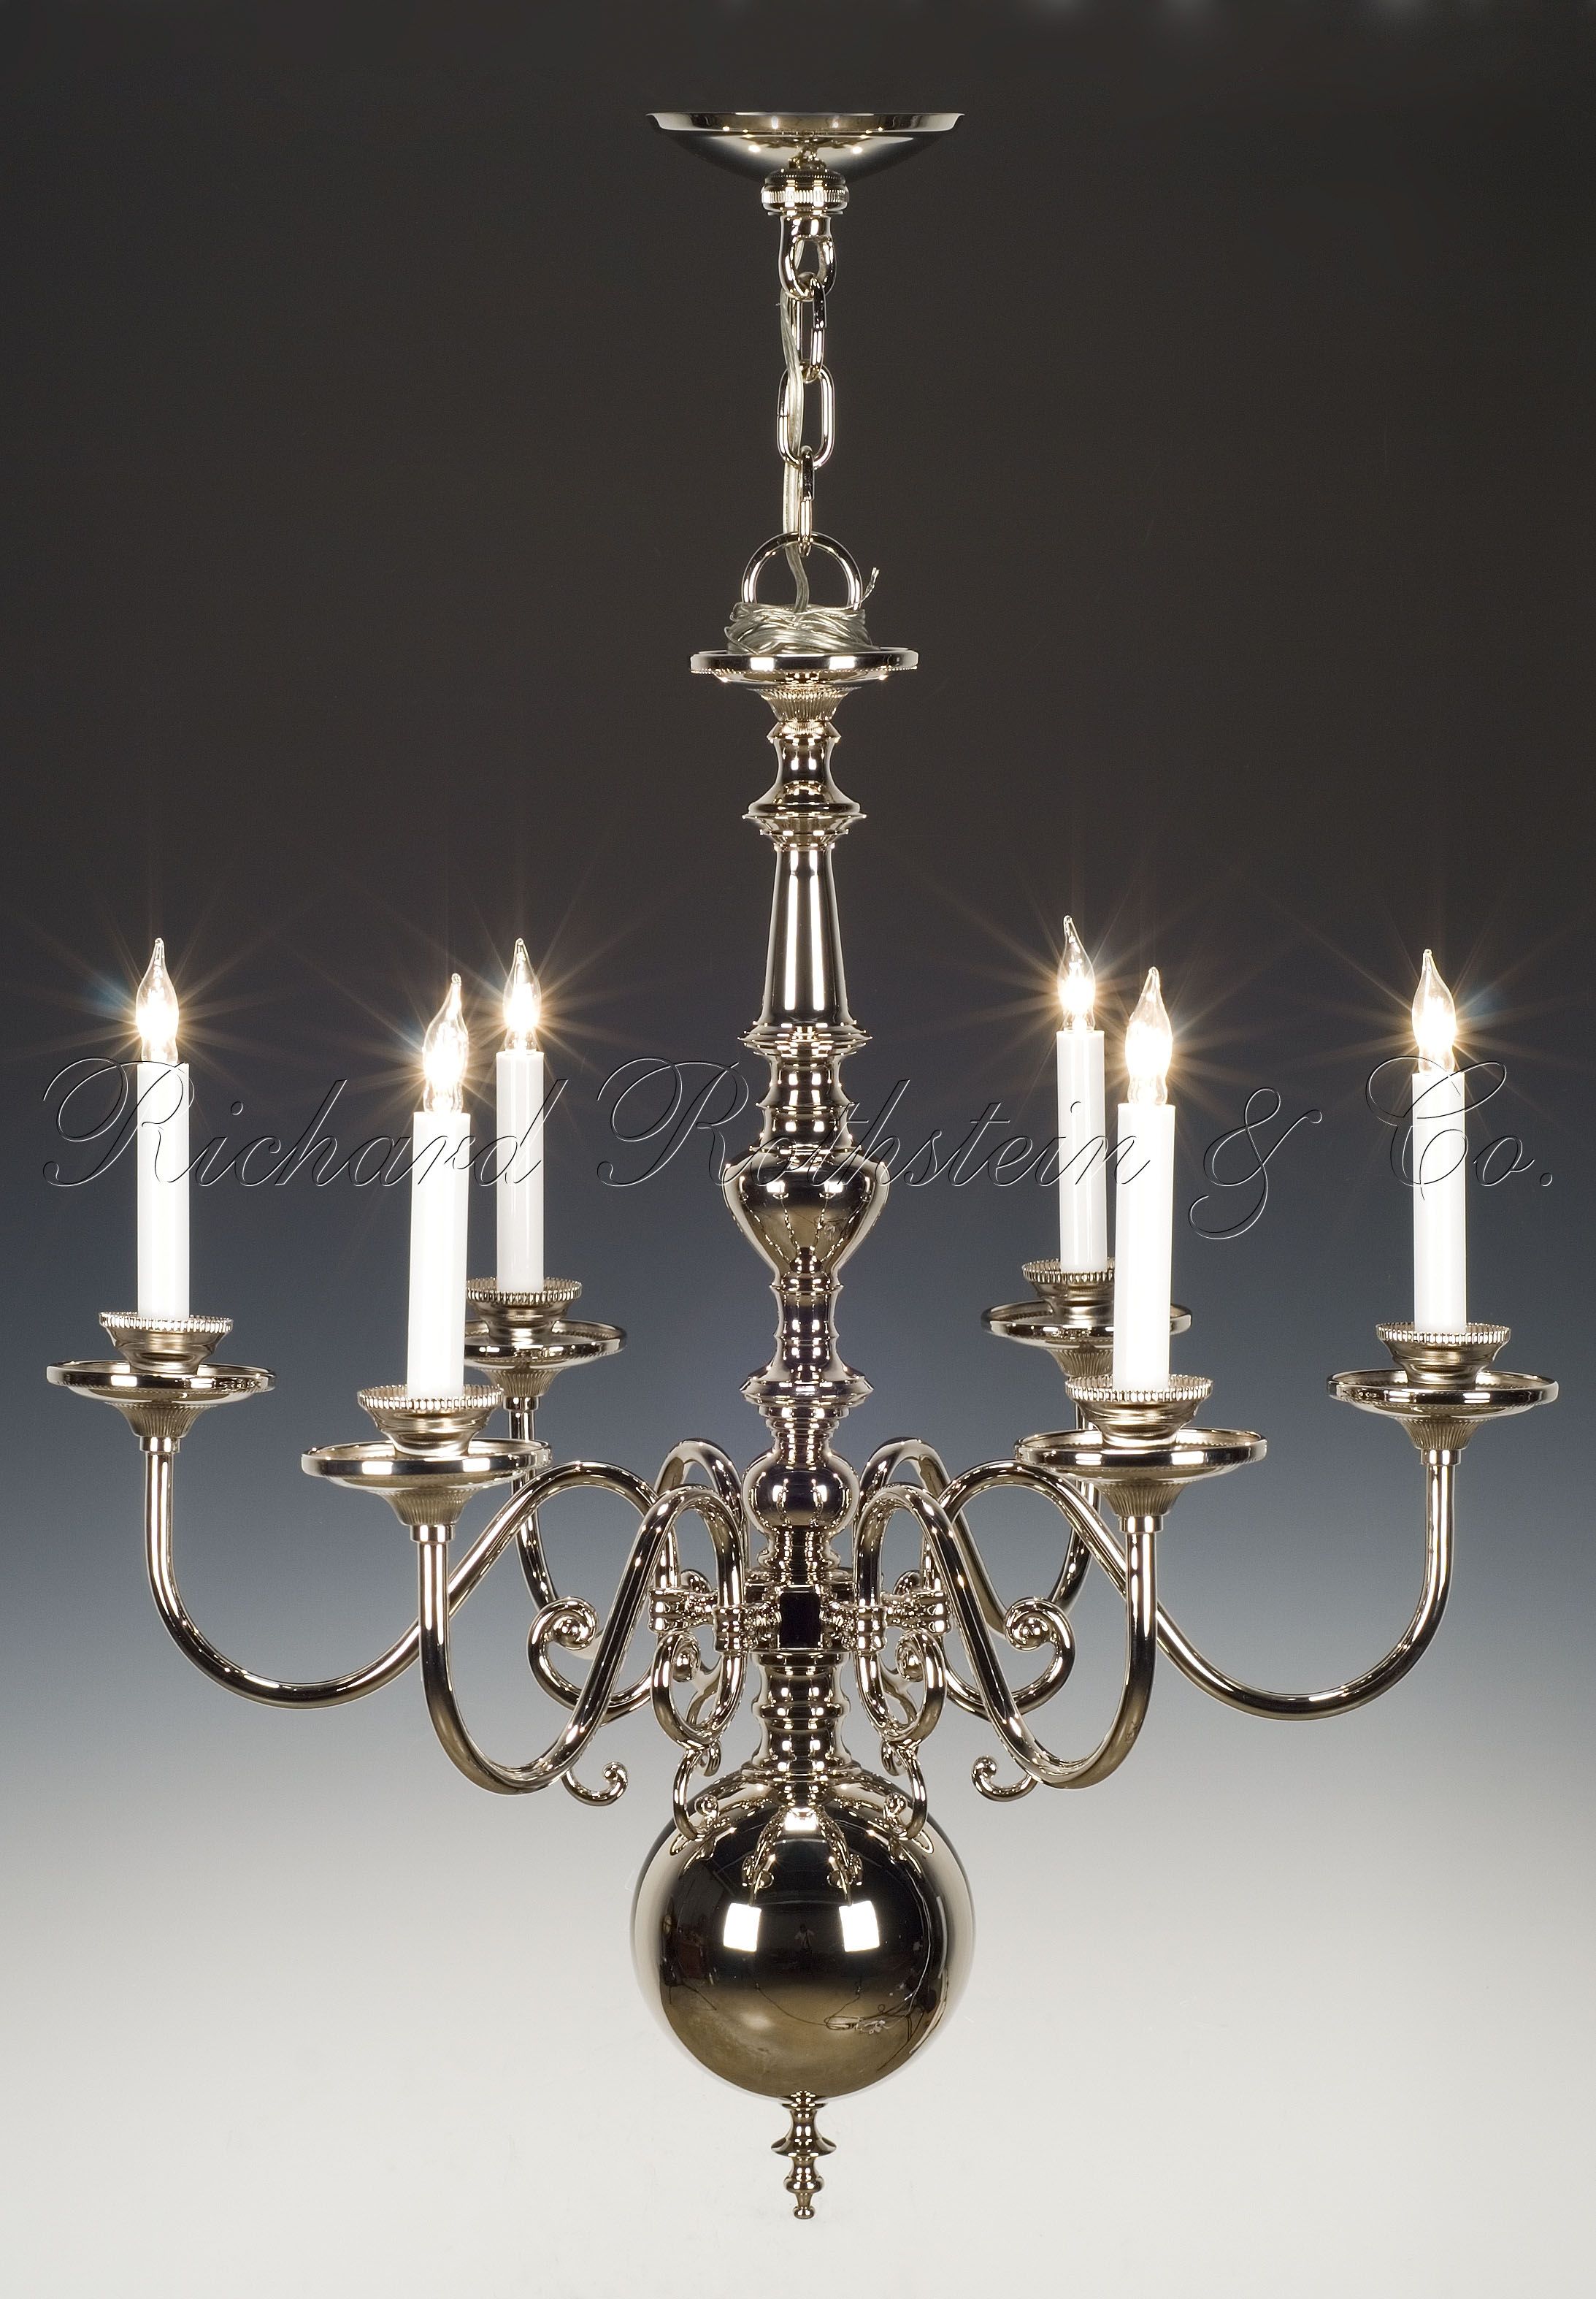 Silver Chandelier Superb For Inspirational Home Designing With With Regard To Silver Chandeliers (Photo 10 of 12)